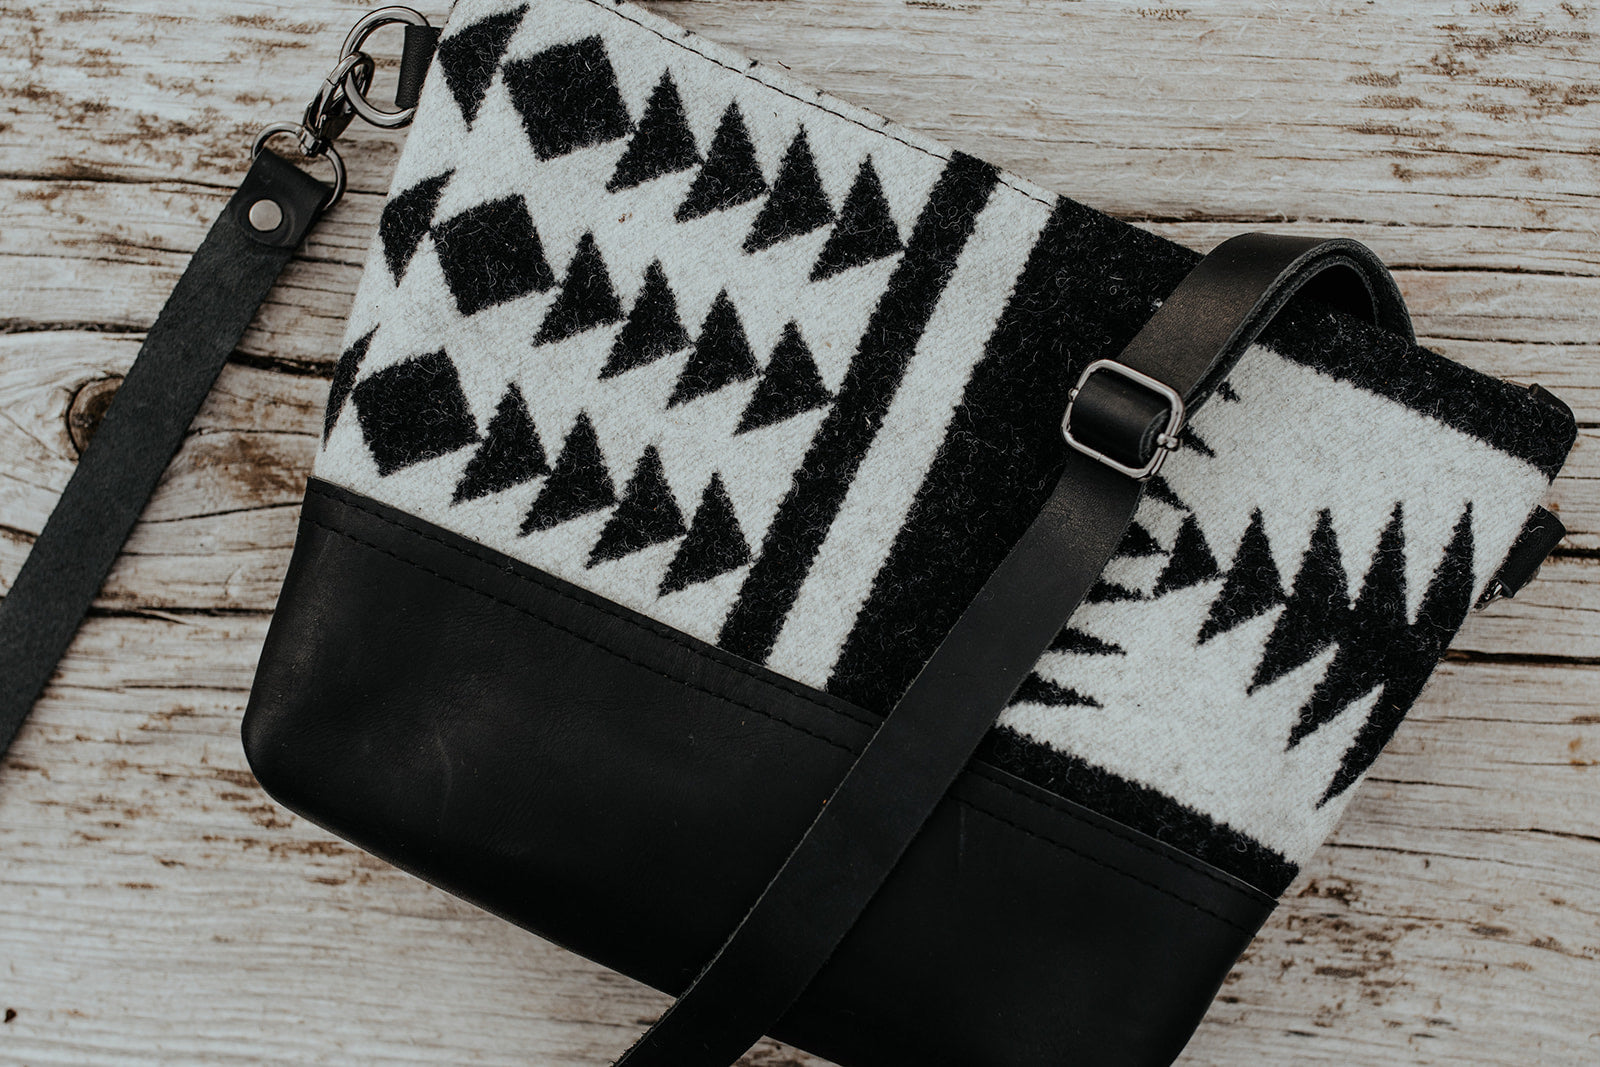 Small Fairfield Wool and Leather Crossbody Bag